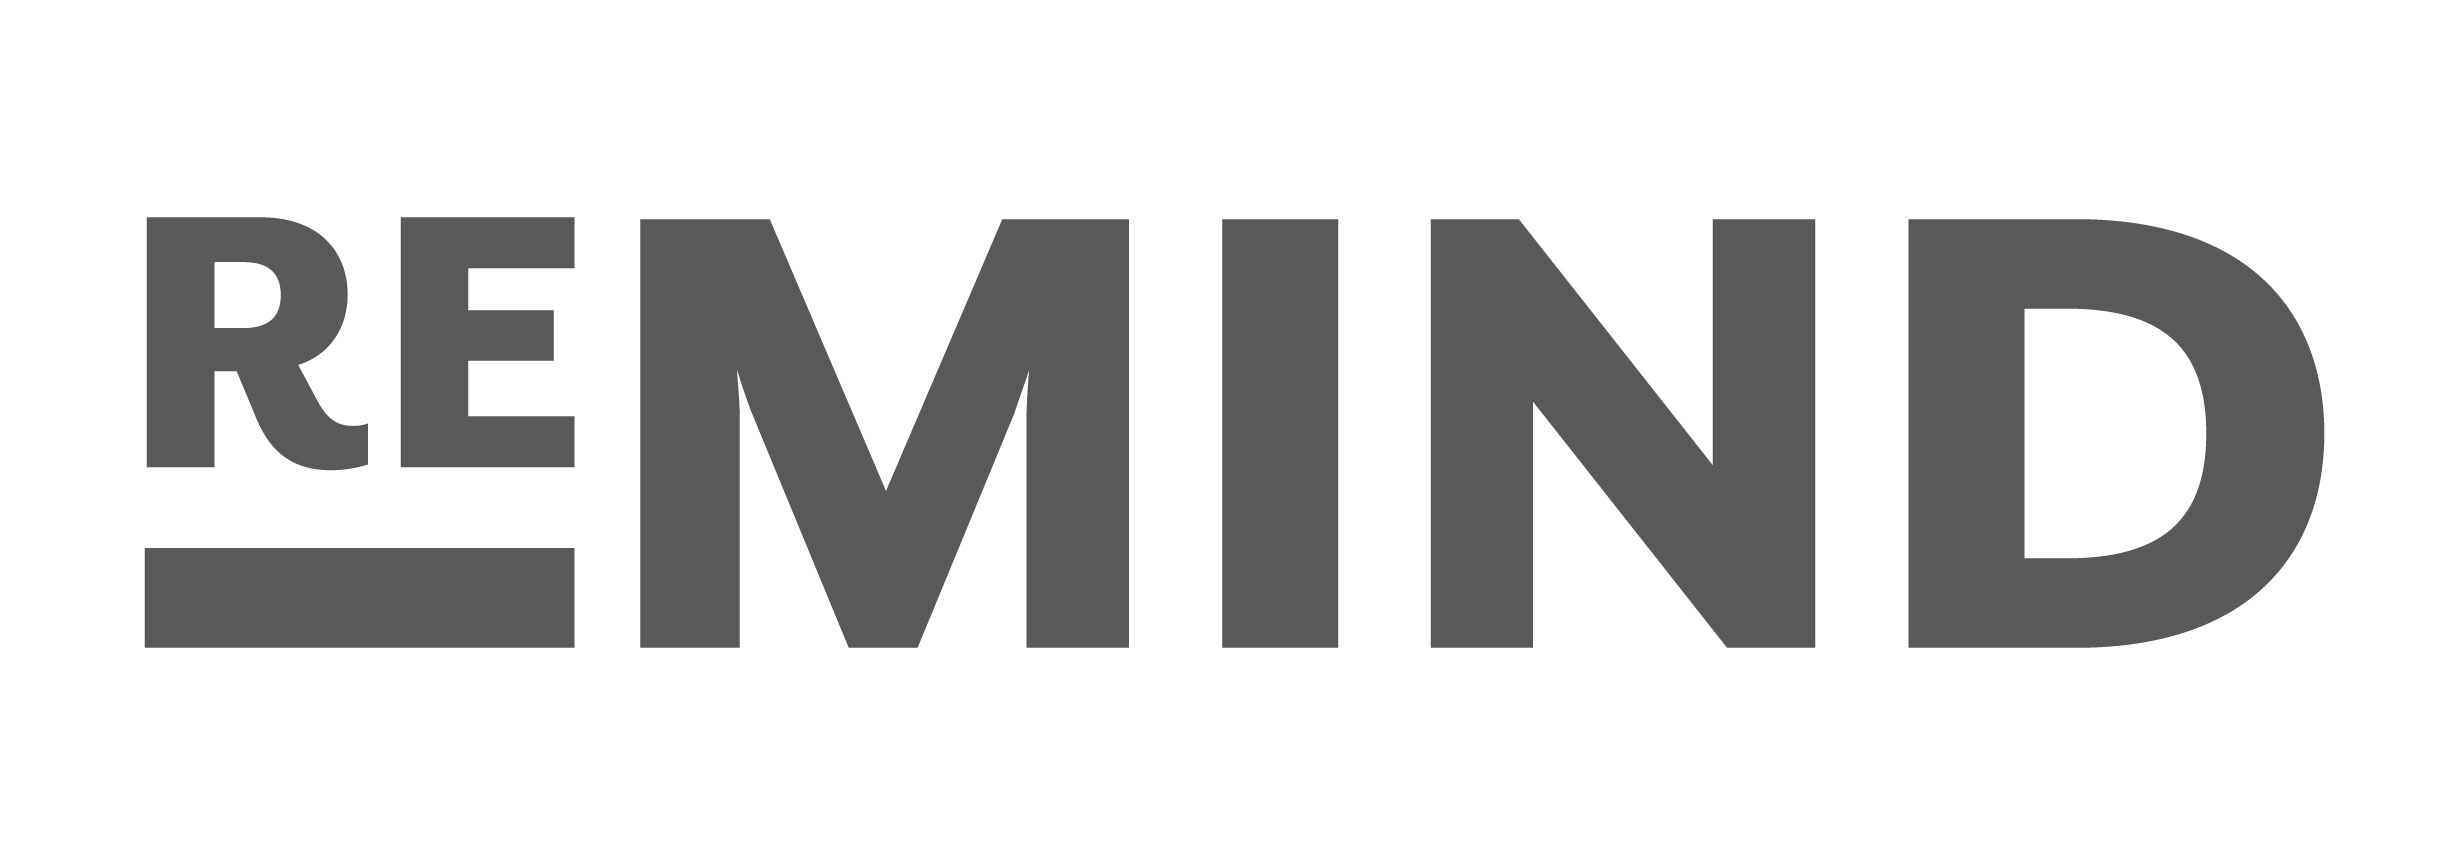 The ReMIND logo is the word remind typeset in a modern slab serif typeface in gray on a white background. The letters RE are smaller than the letters MIND, and aligned to the capheight of the word, with a bar under them, signaling RE meaning about.